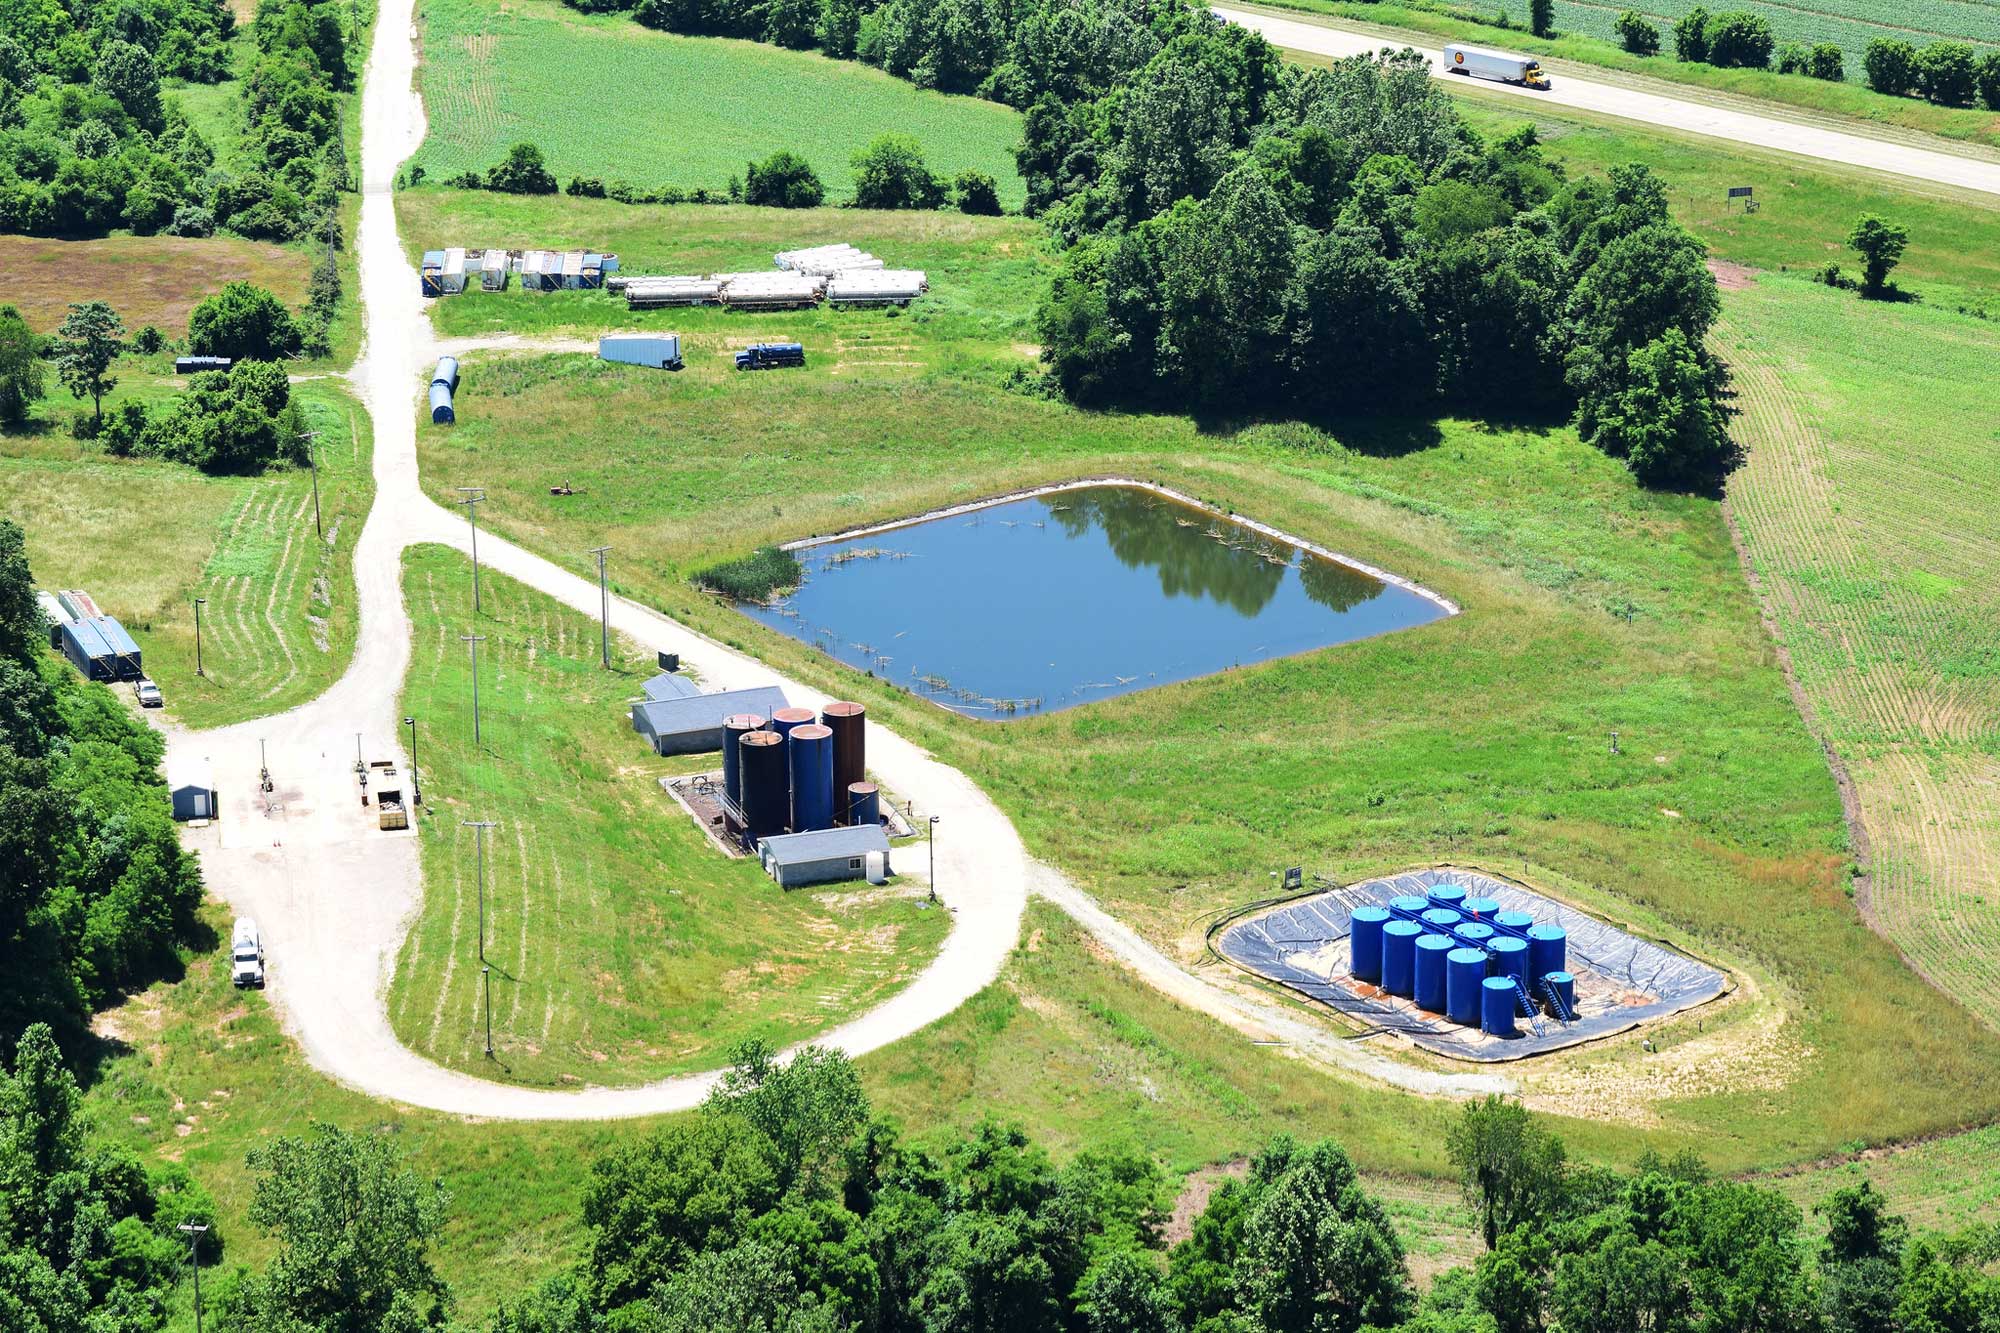 Aerial photograph of an injection well site in Meigs County, Ohio. The photo shows a road ending in a loop, with a series of tall storage tanks on the inner edge of the right side of the loop. To the right, a spur road leads to another group of storage tanks. A square holding pond is in the center of the image. The surrounding landscape green with grass, trees, and scattered groups of structures.